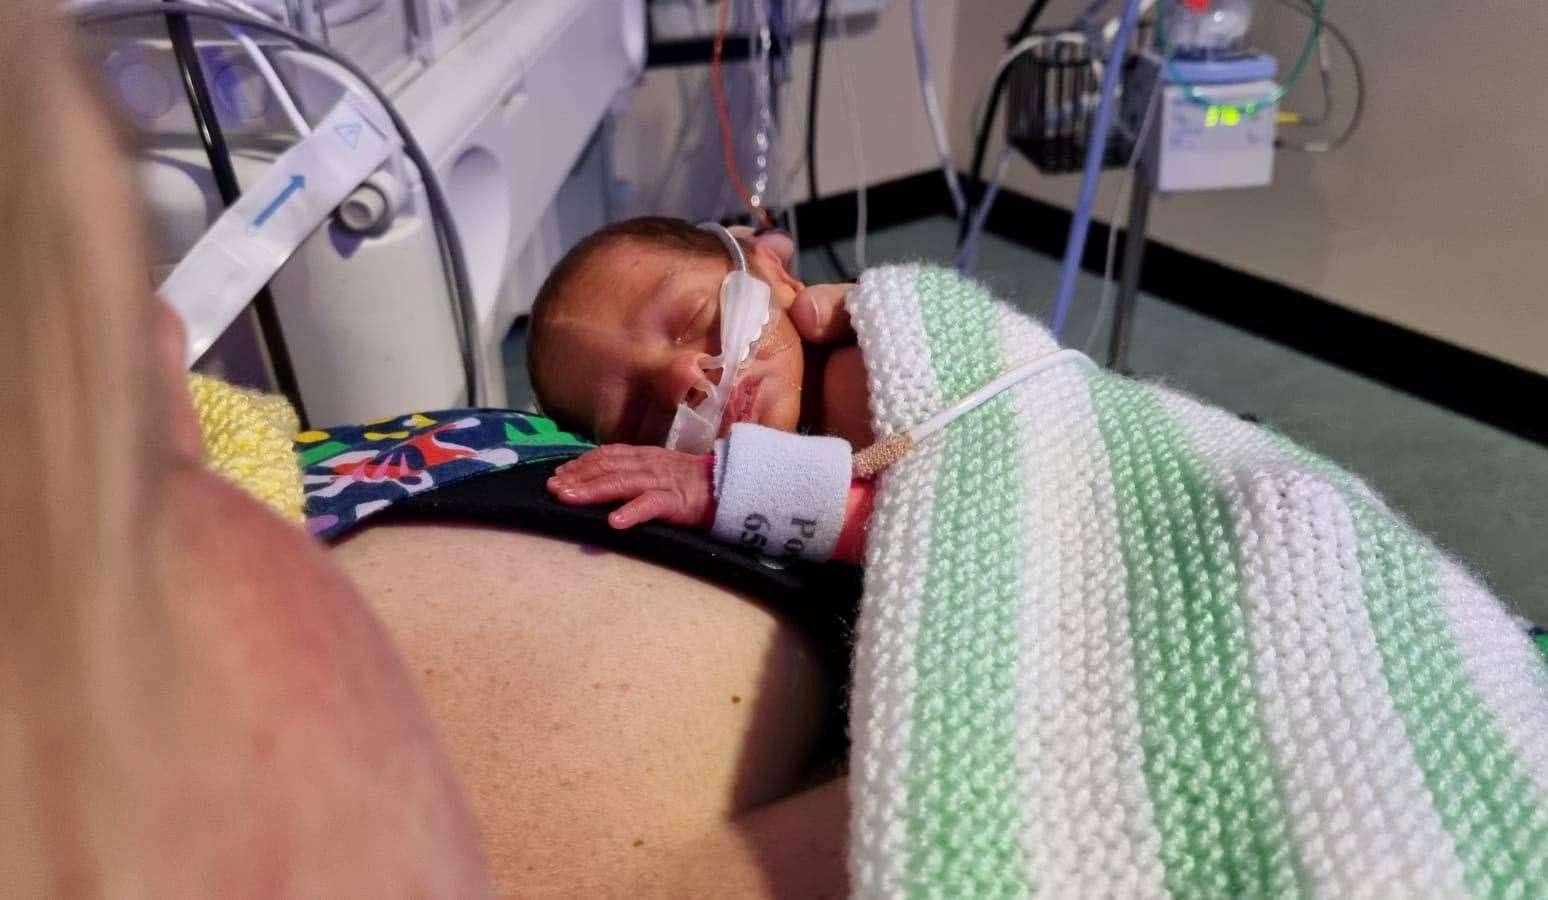 Rupert was born 11 weeks early. Picture: SWNS